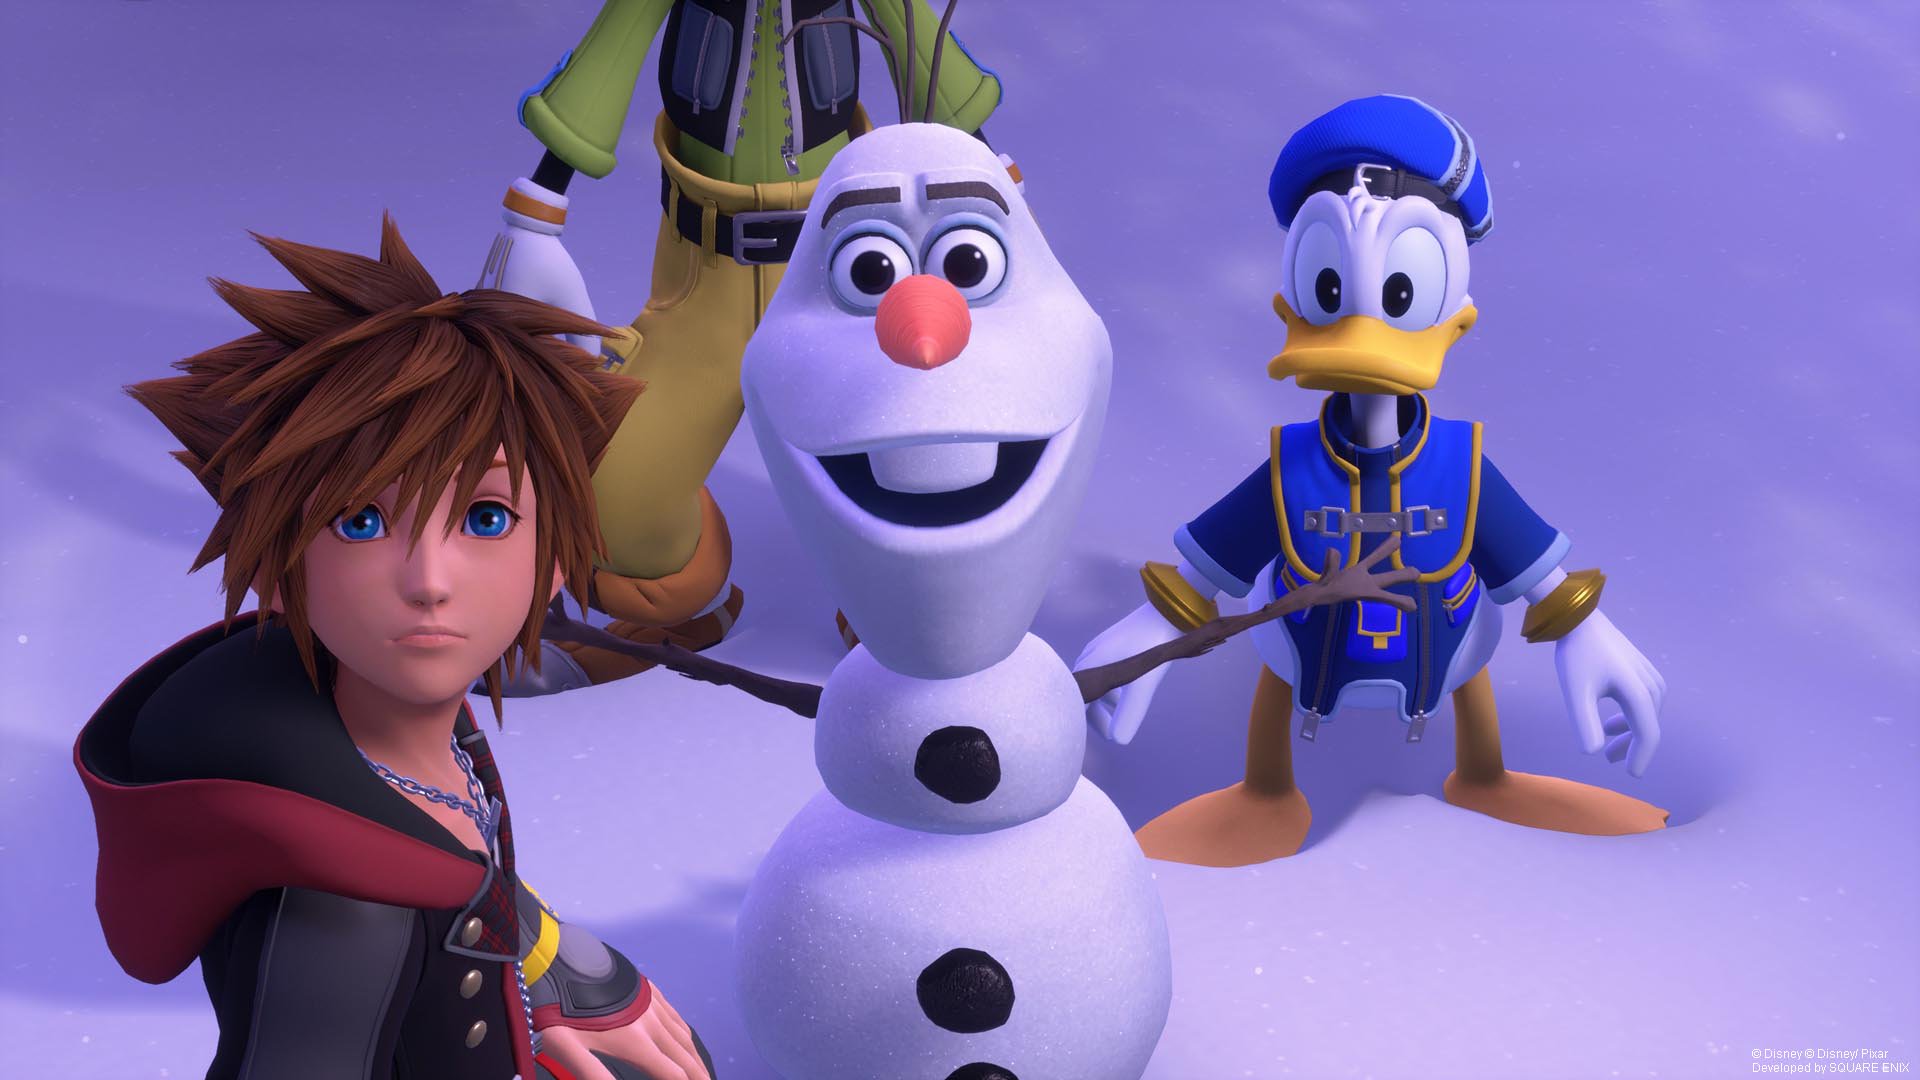 Everything You Need to Know Before Playing Kingdom Hearts III